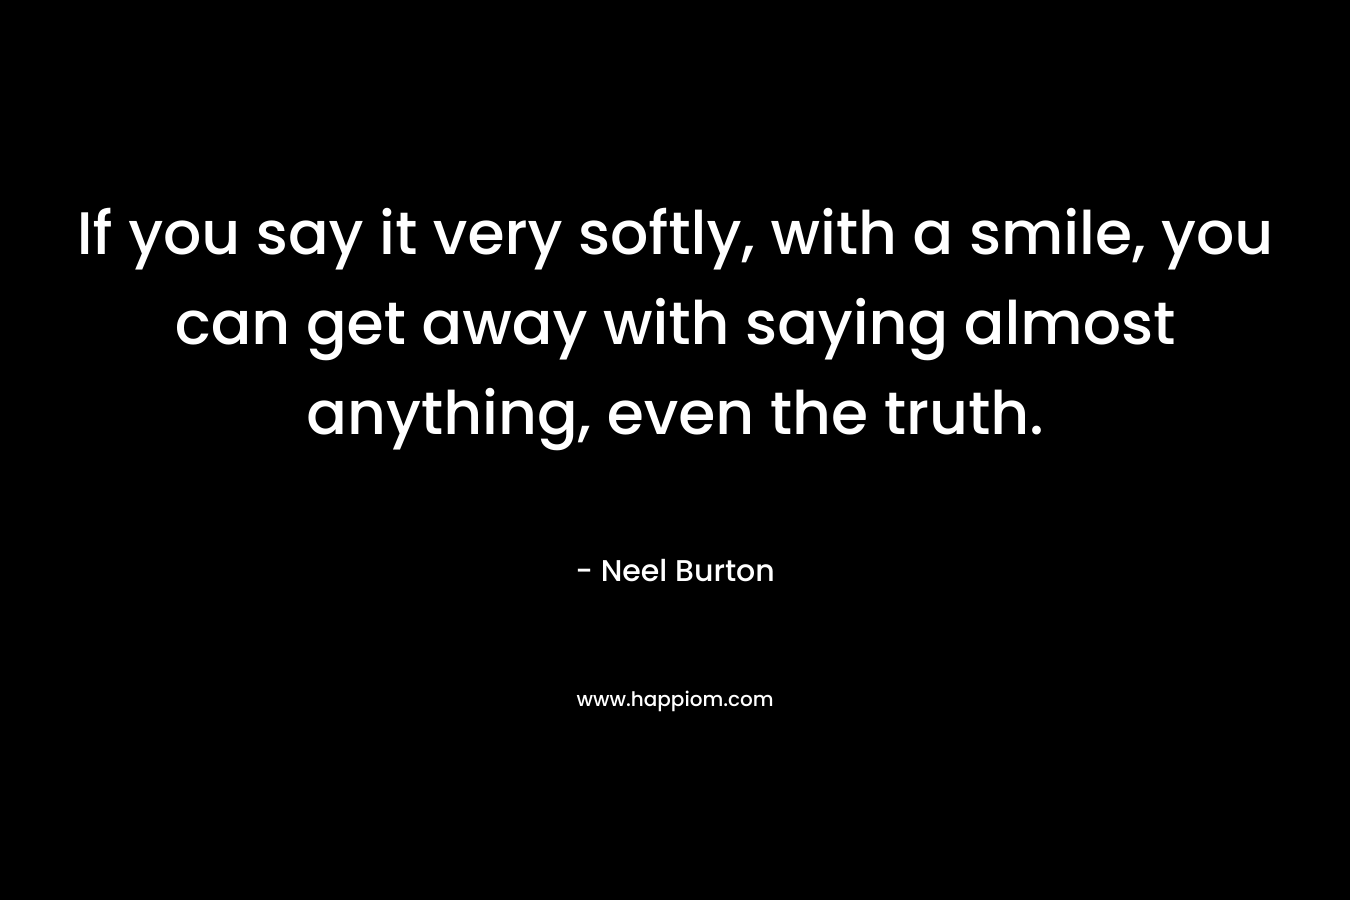 If you say it very softly, with a smile, you can get away with saying almost anything, even the truth.